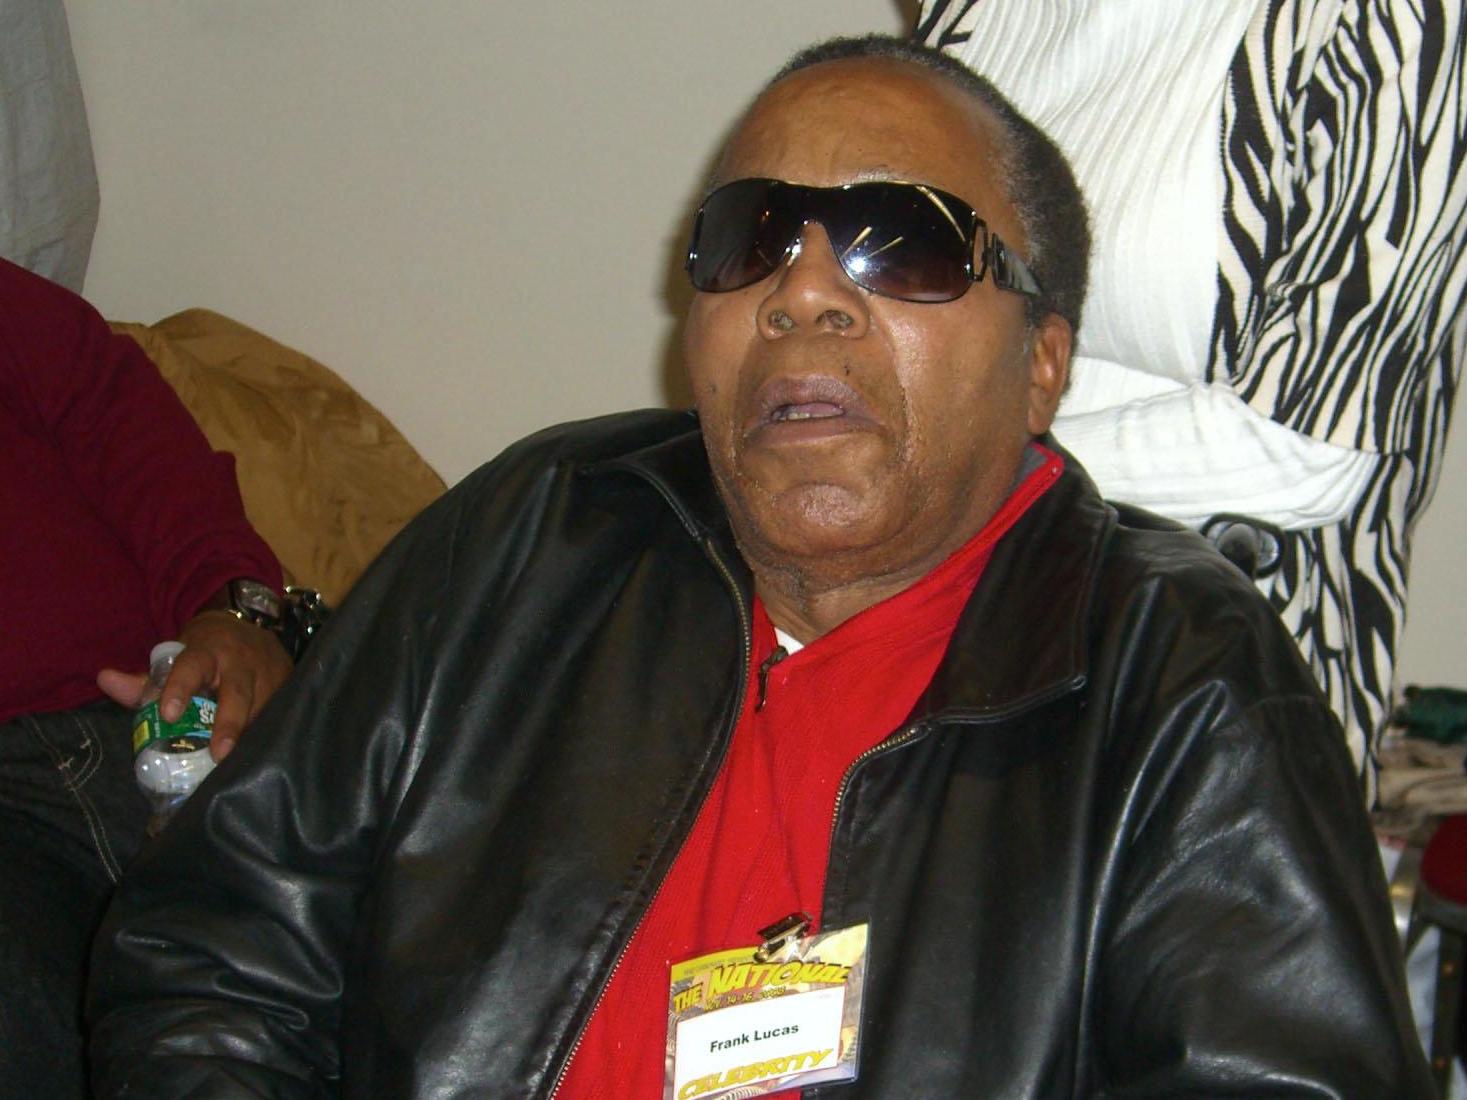 Frank Lucas death: Infamous drug kingpin portrayed in 'American Gangster'  dies aged 88, The Independent